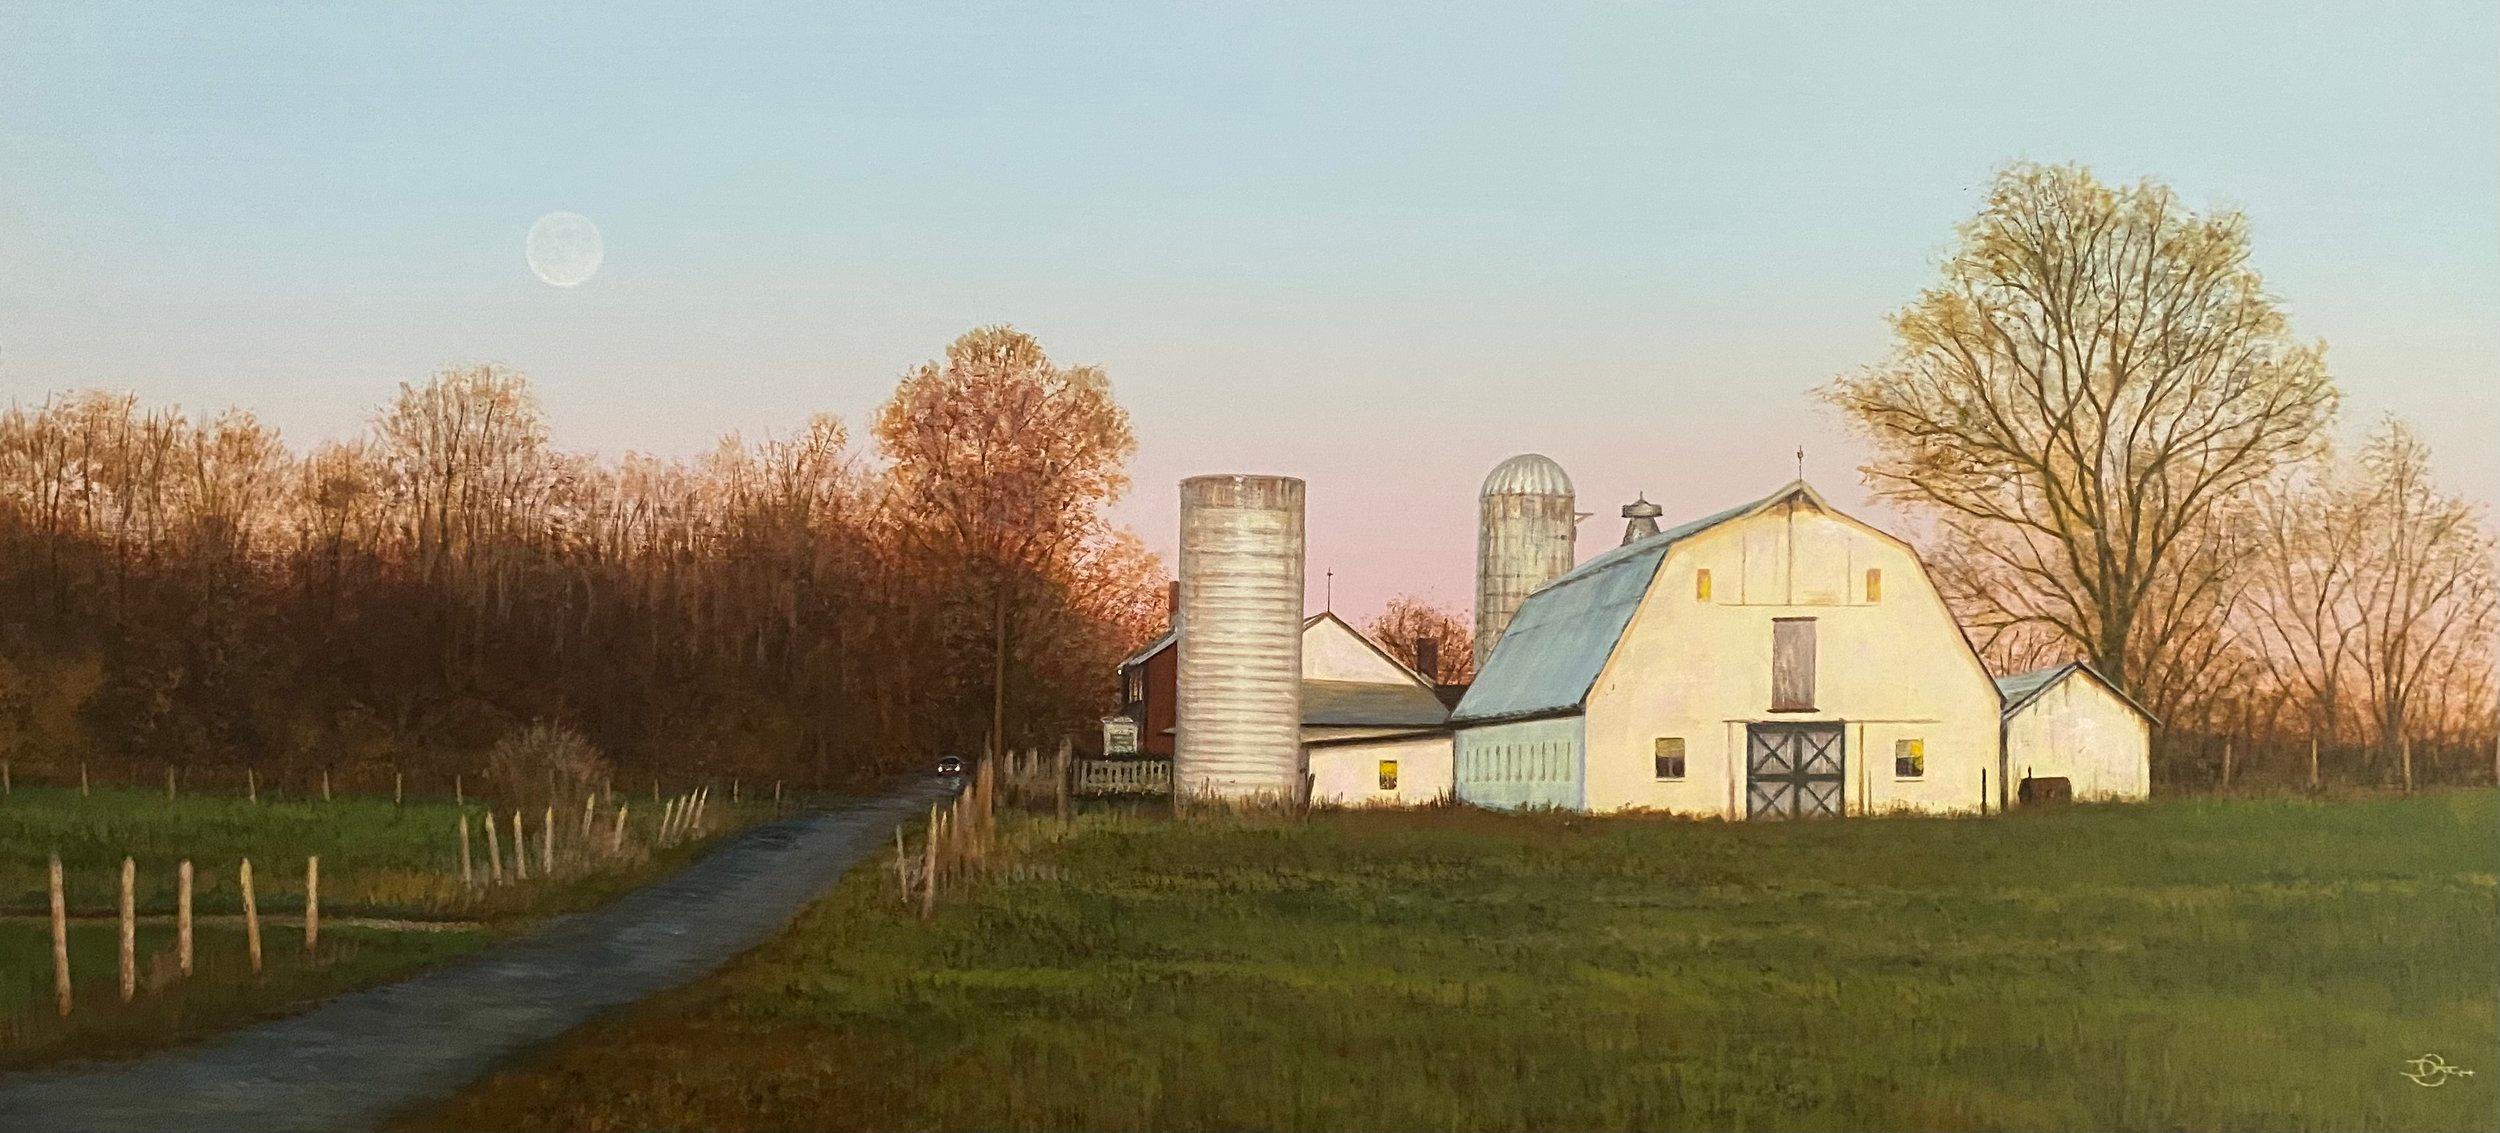 This piece, "Coming Evening", is a 10x21 acrylic painting on board by artist Del Bourree Bach featuring a rural landscape at dusk. Headlights glow down an old dirt road lined with pastures on both sides. A large white barn and silo soak in the last